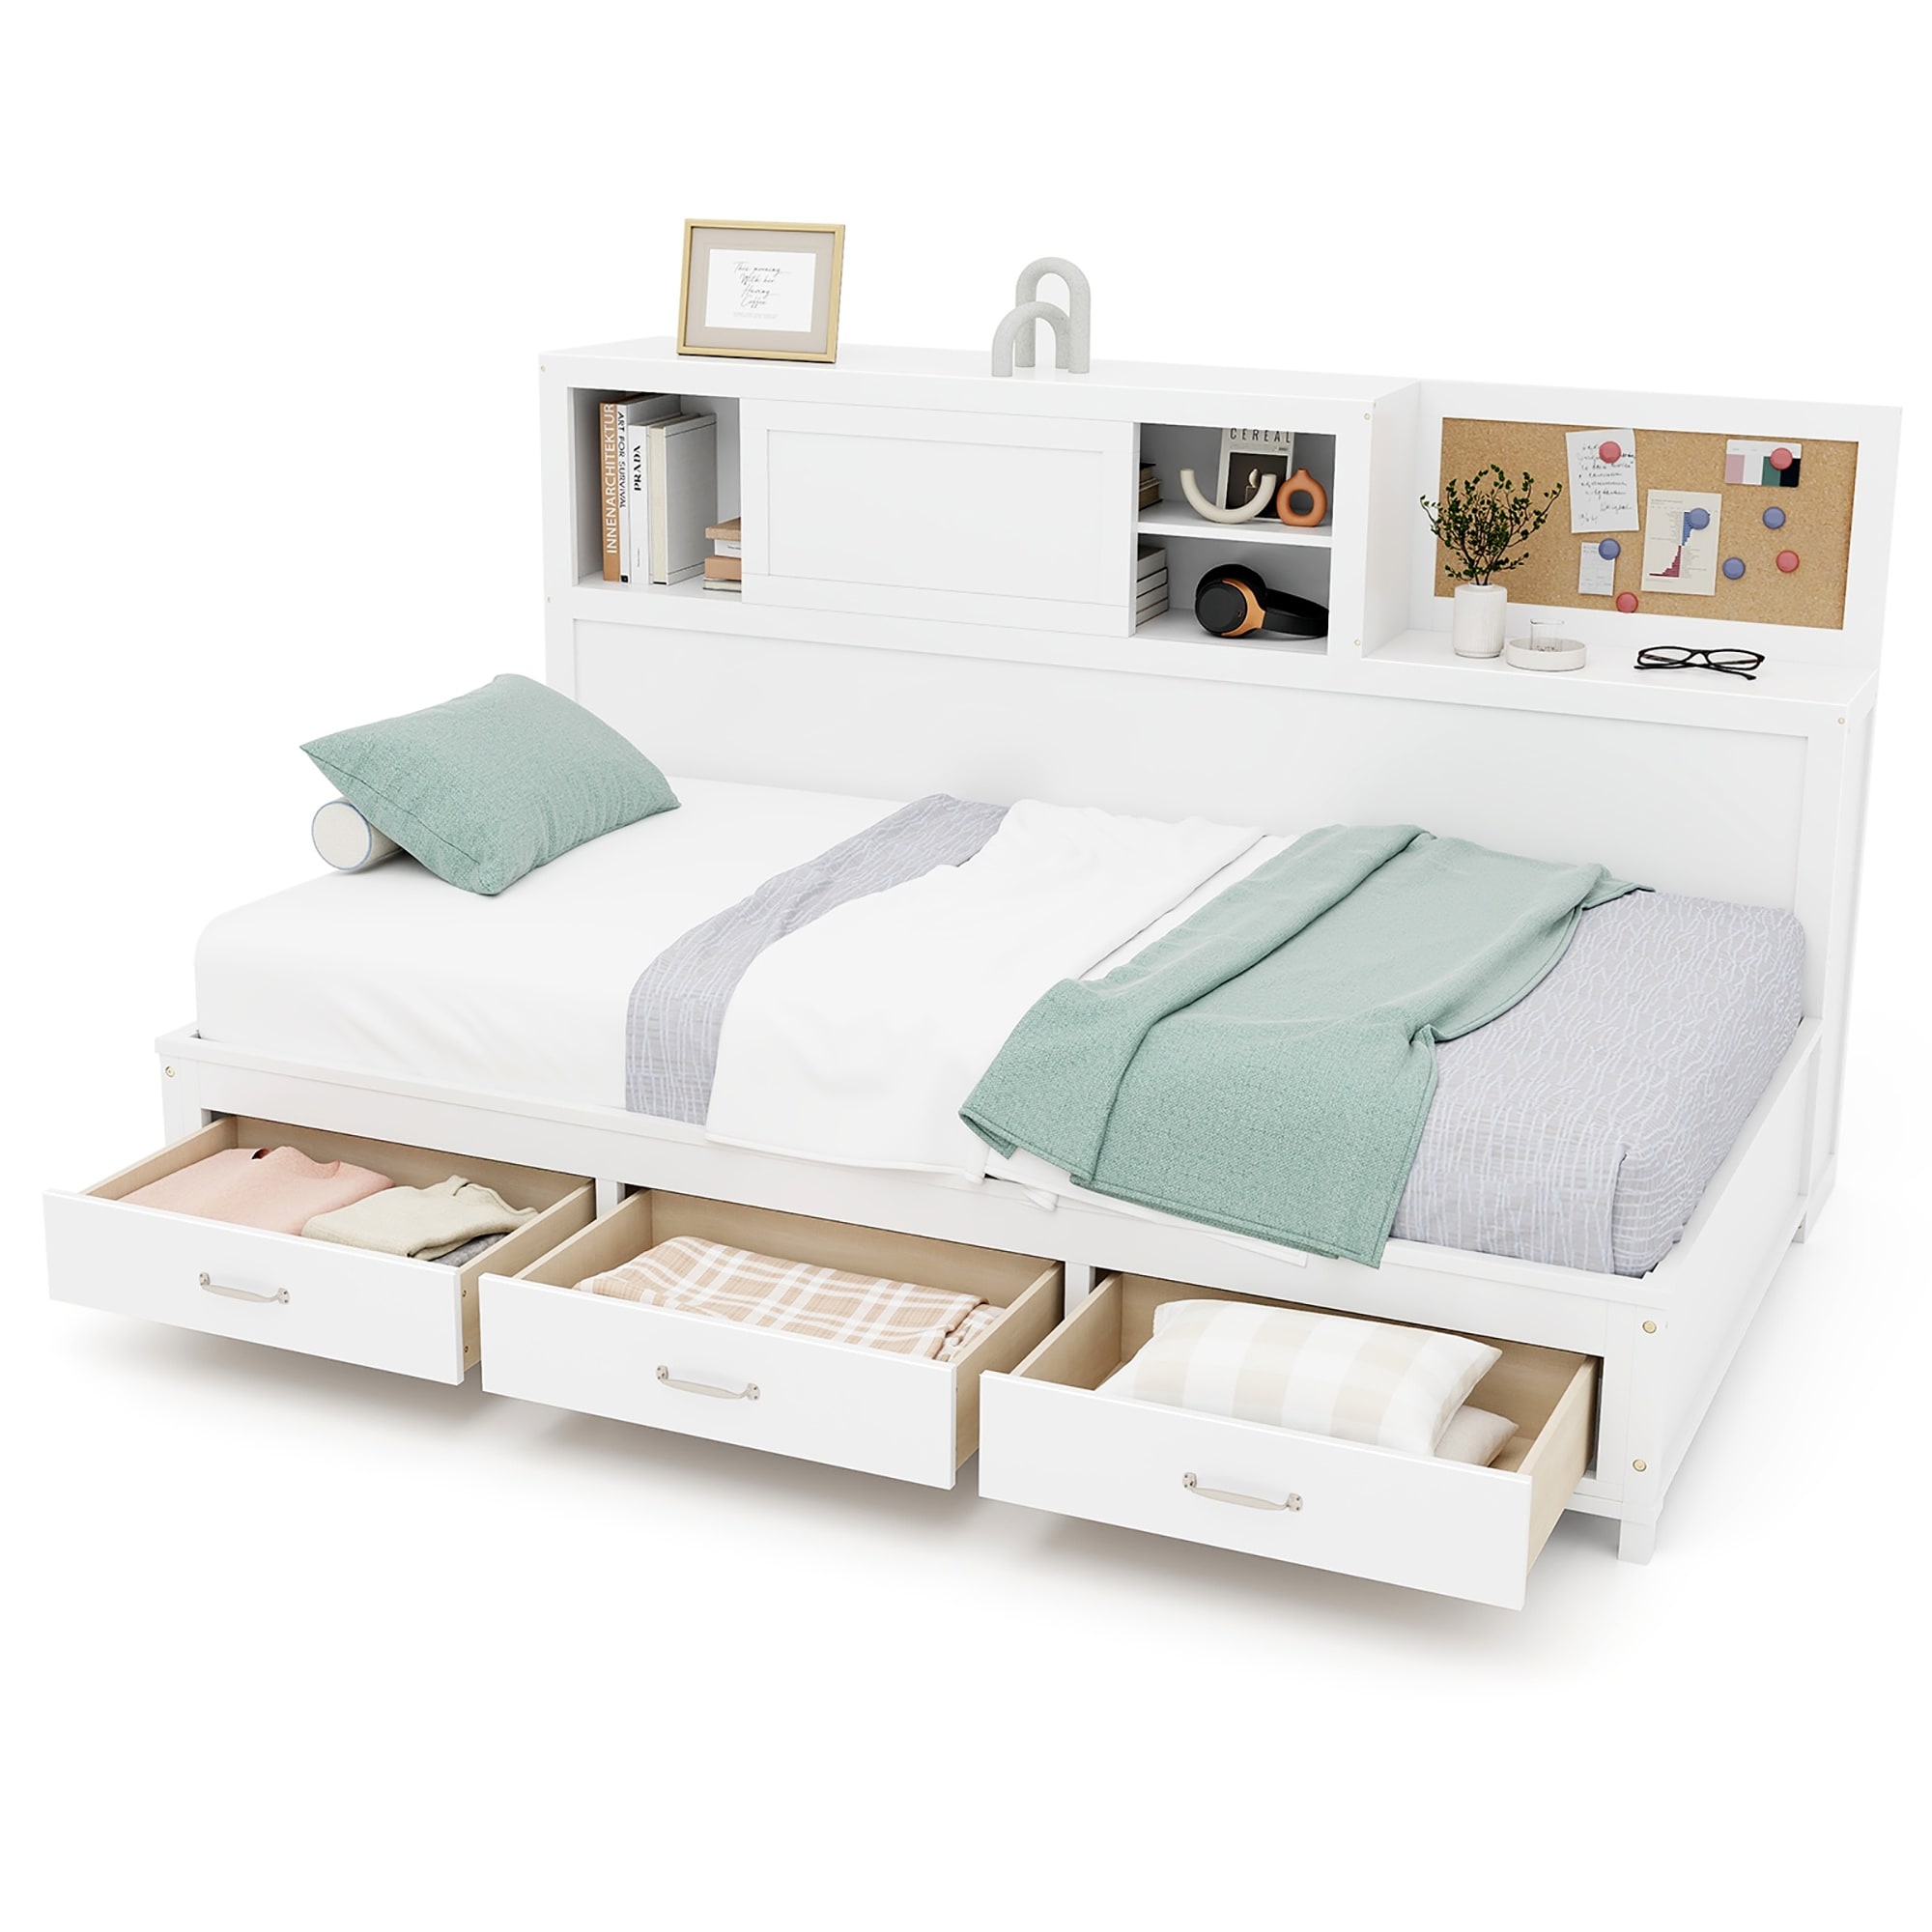 Gymax Twin Size Daybed w/ 3 Drawers Wooden Sofa Bed Frame w/ Storage